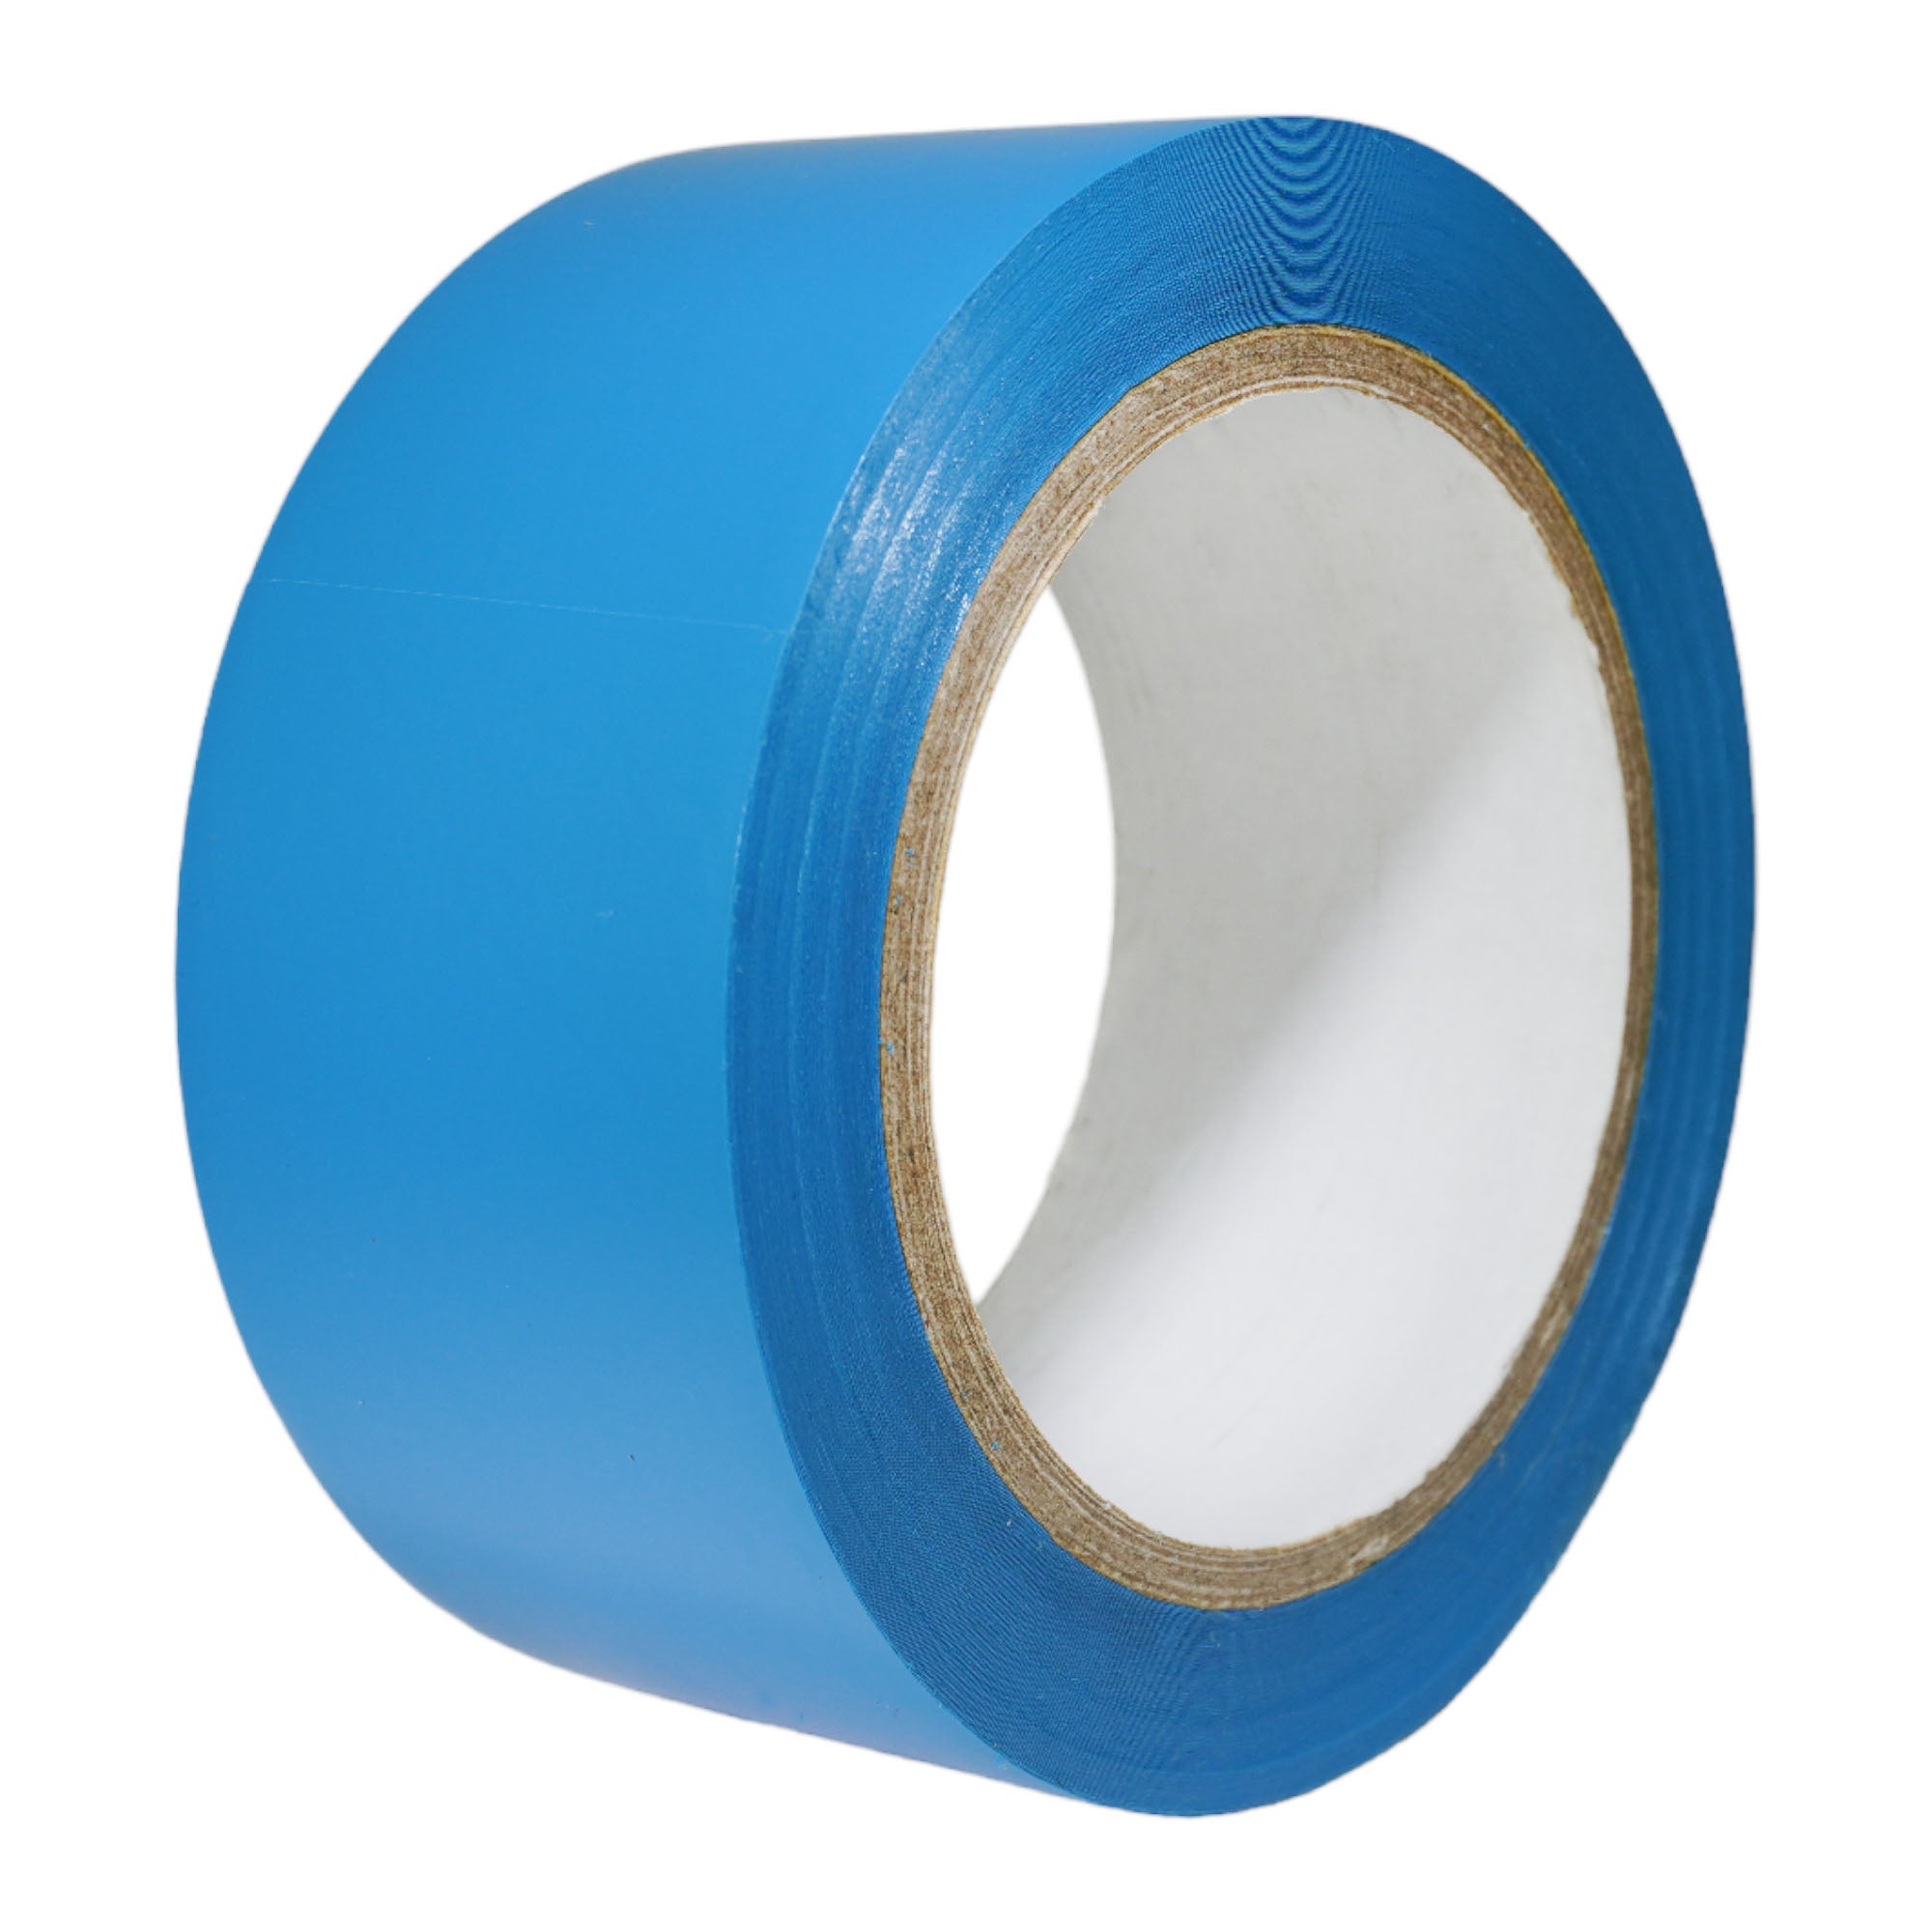 GGR Supplies CVT-536 Color Vinyl Pinstriping Dance Floor Tape: 2" X 36 yds. 13 Colors Available